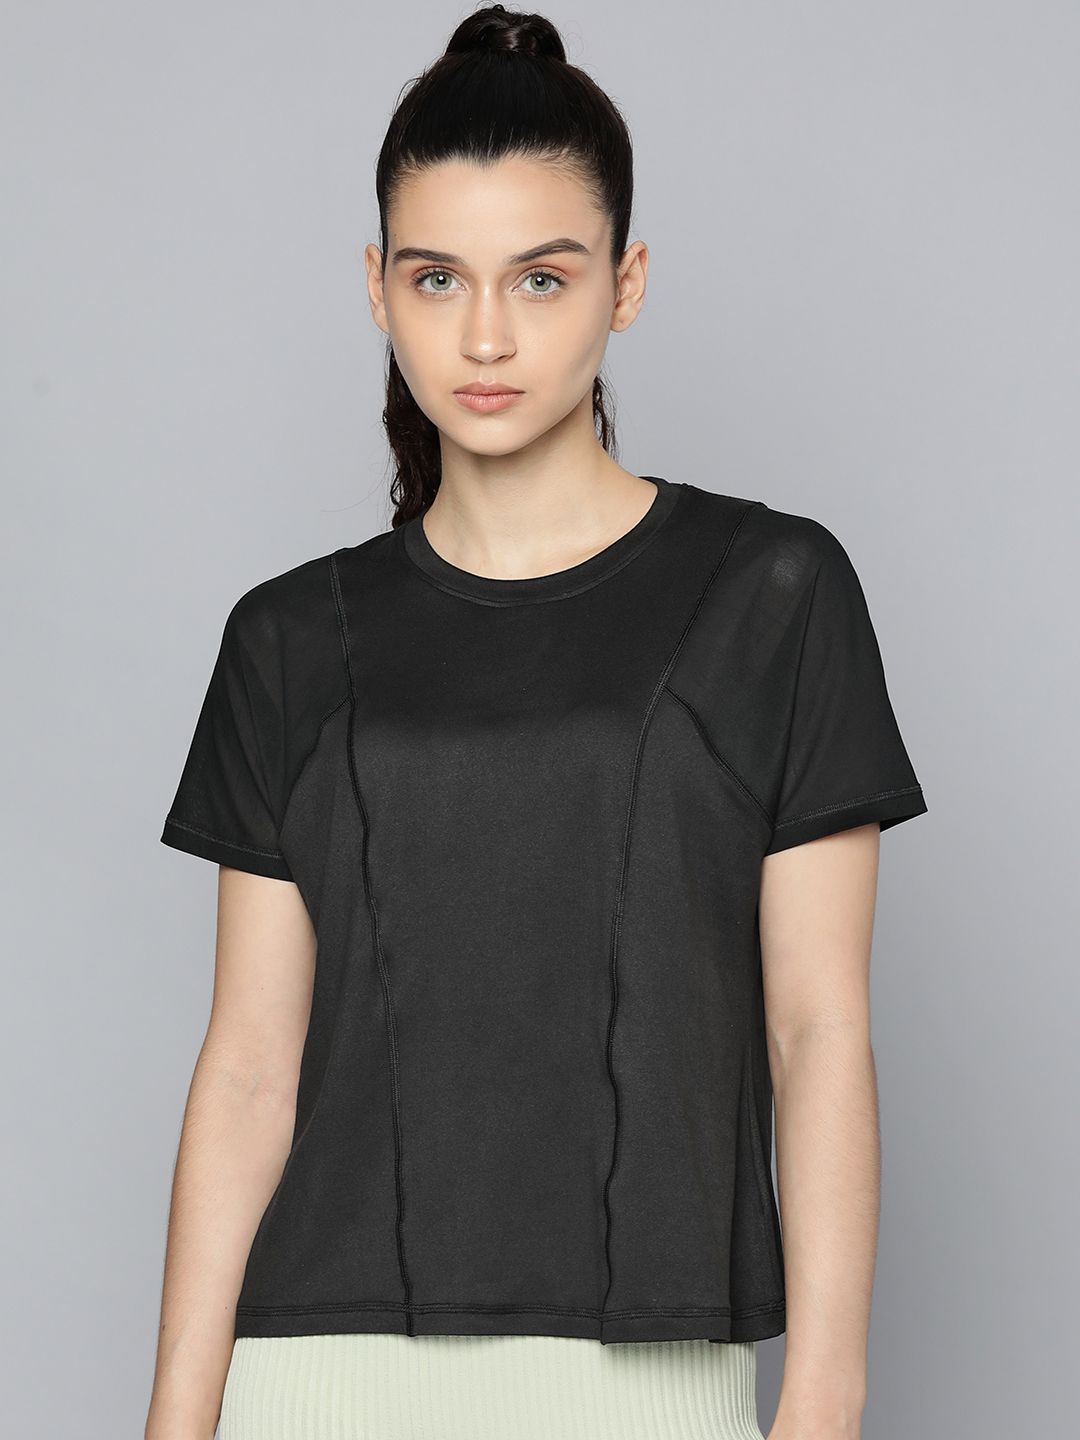 Fitkin Women Black Solid T-shirt Price in India